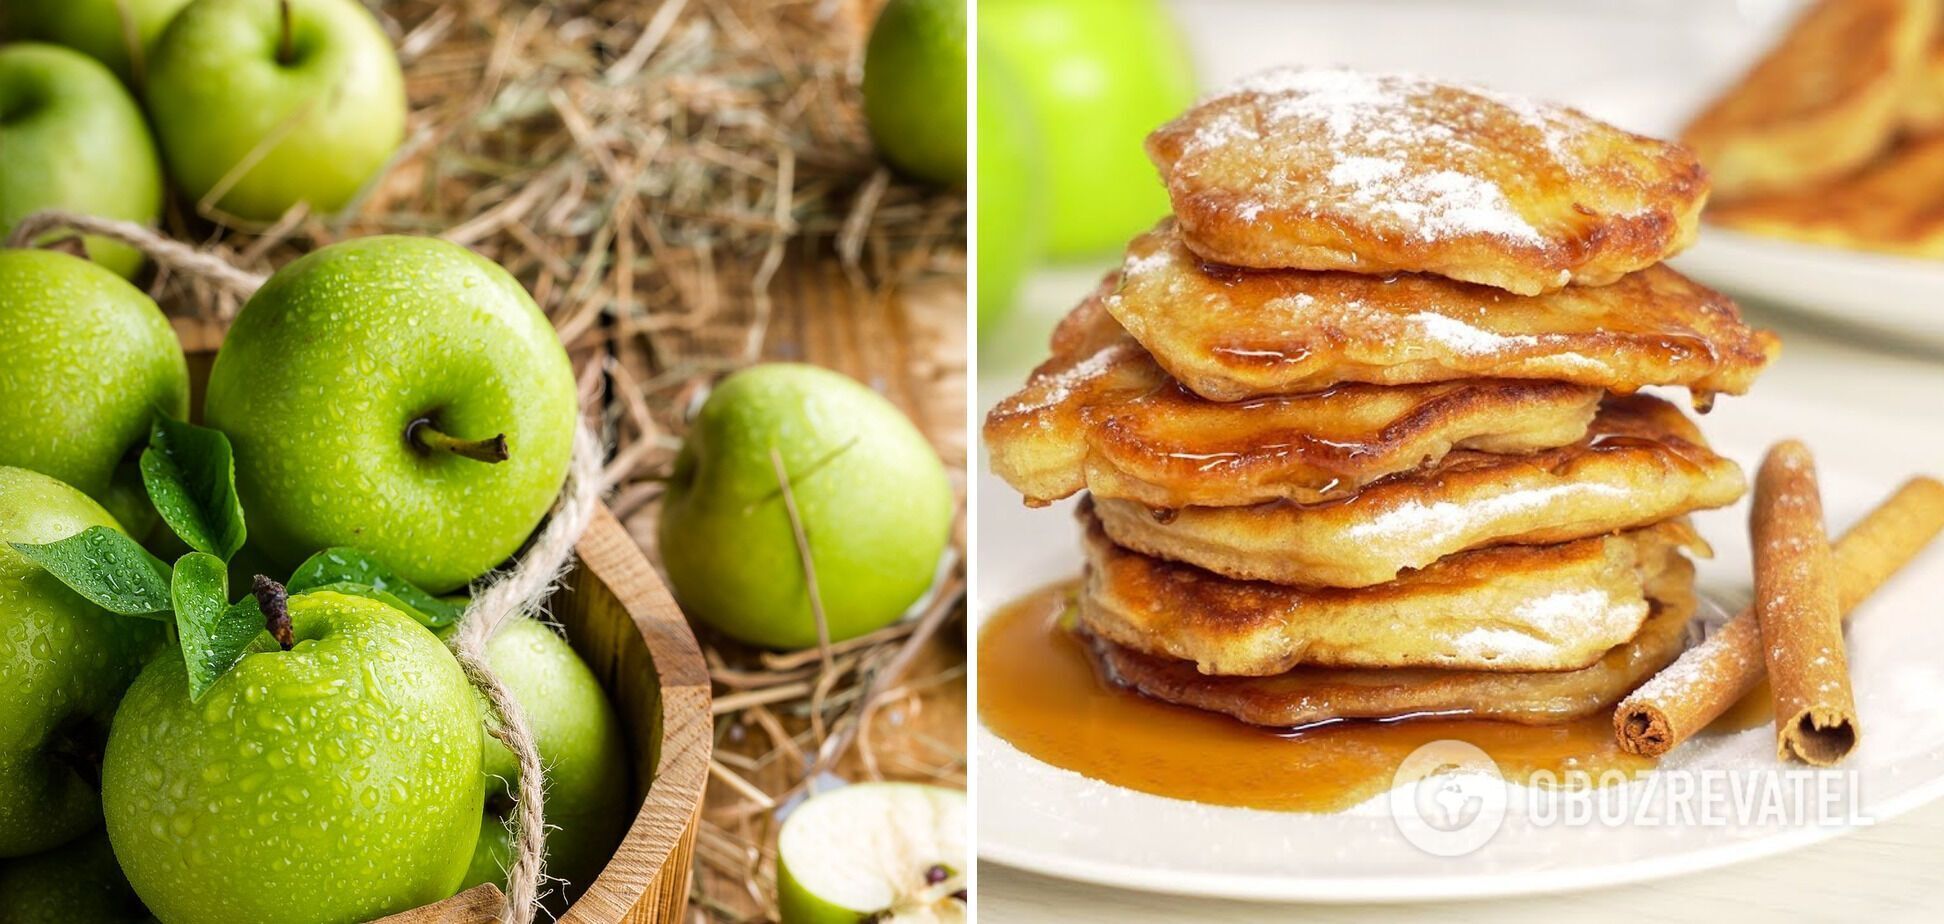 Apples for pancakes